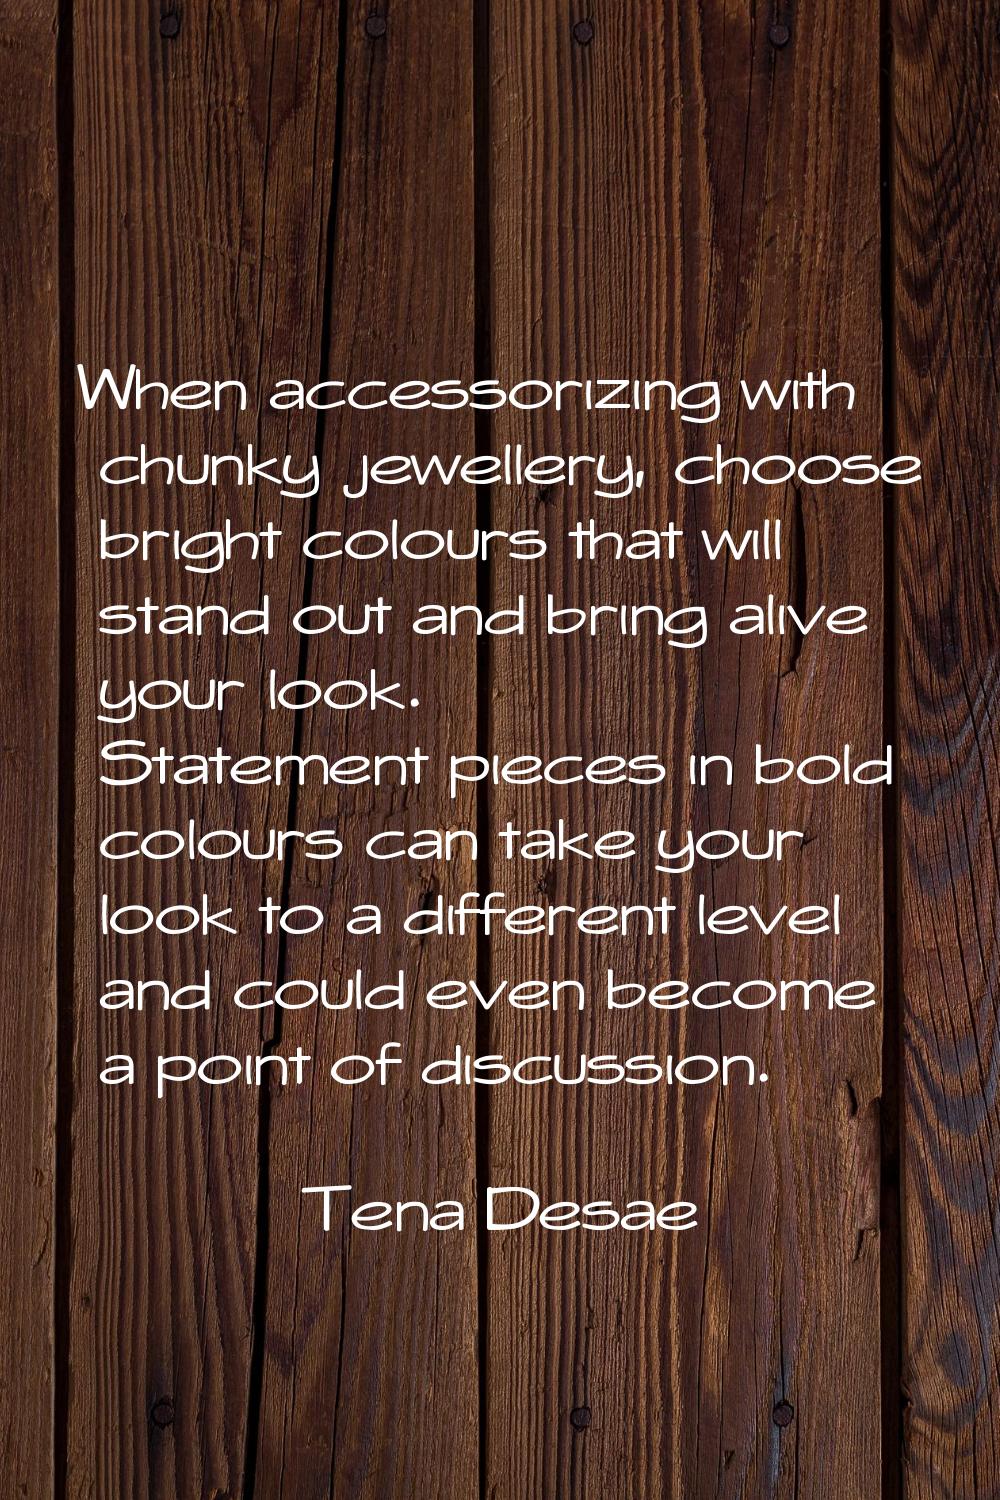 When accessorizing with chunky jewellery, choose bright colours that will stand out and bring alive